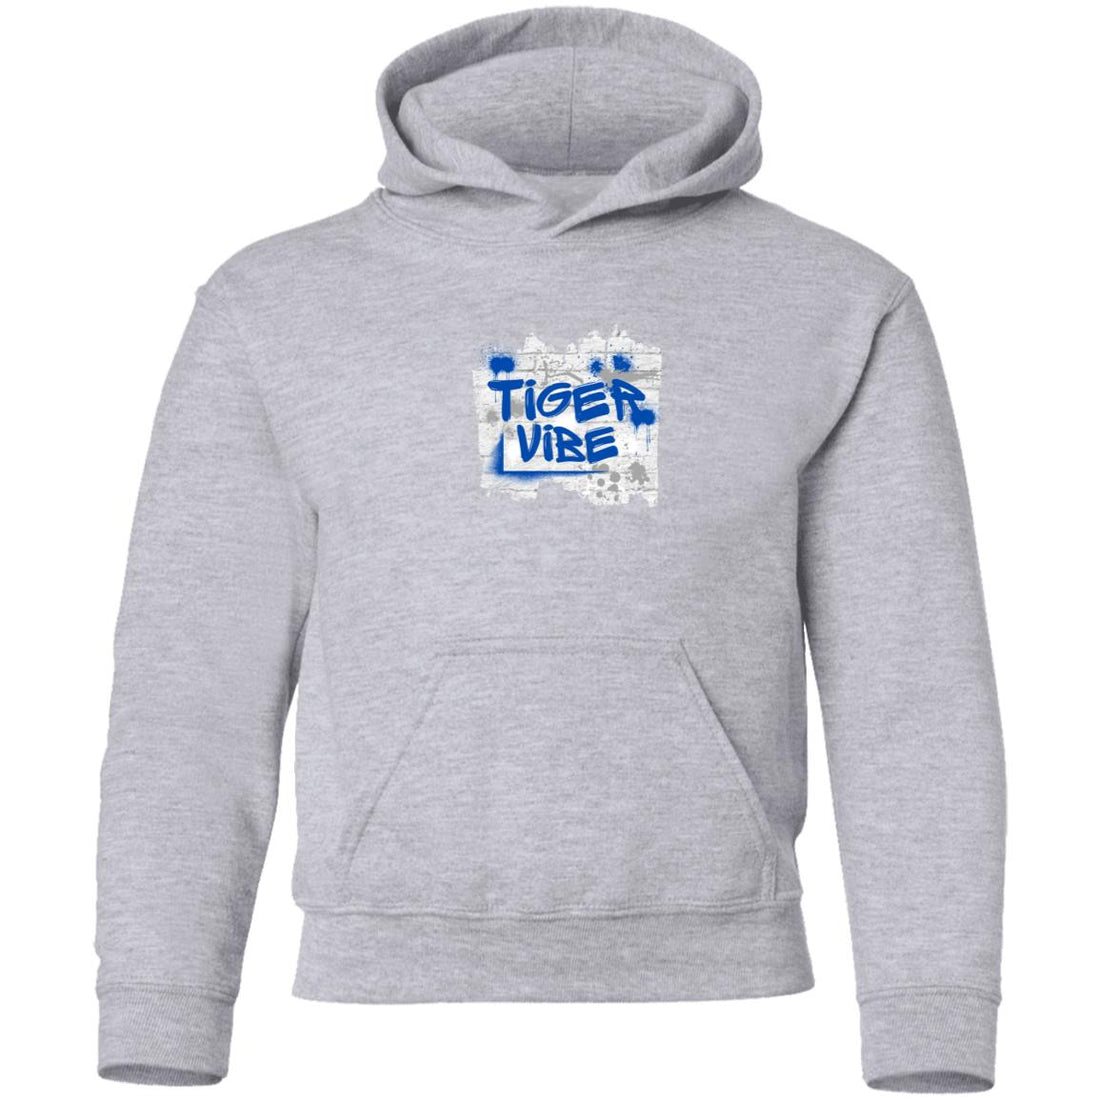 Tiger Vibe Youth Pullover Hoodie - Sweatshirts - Positively Sassy - Tiger Vibe Youth Pullover Hoodie